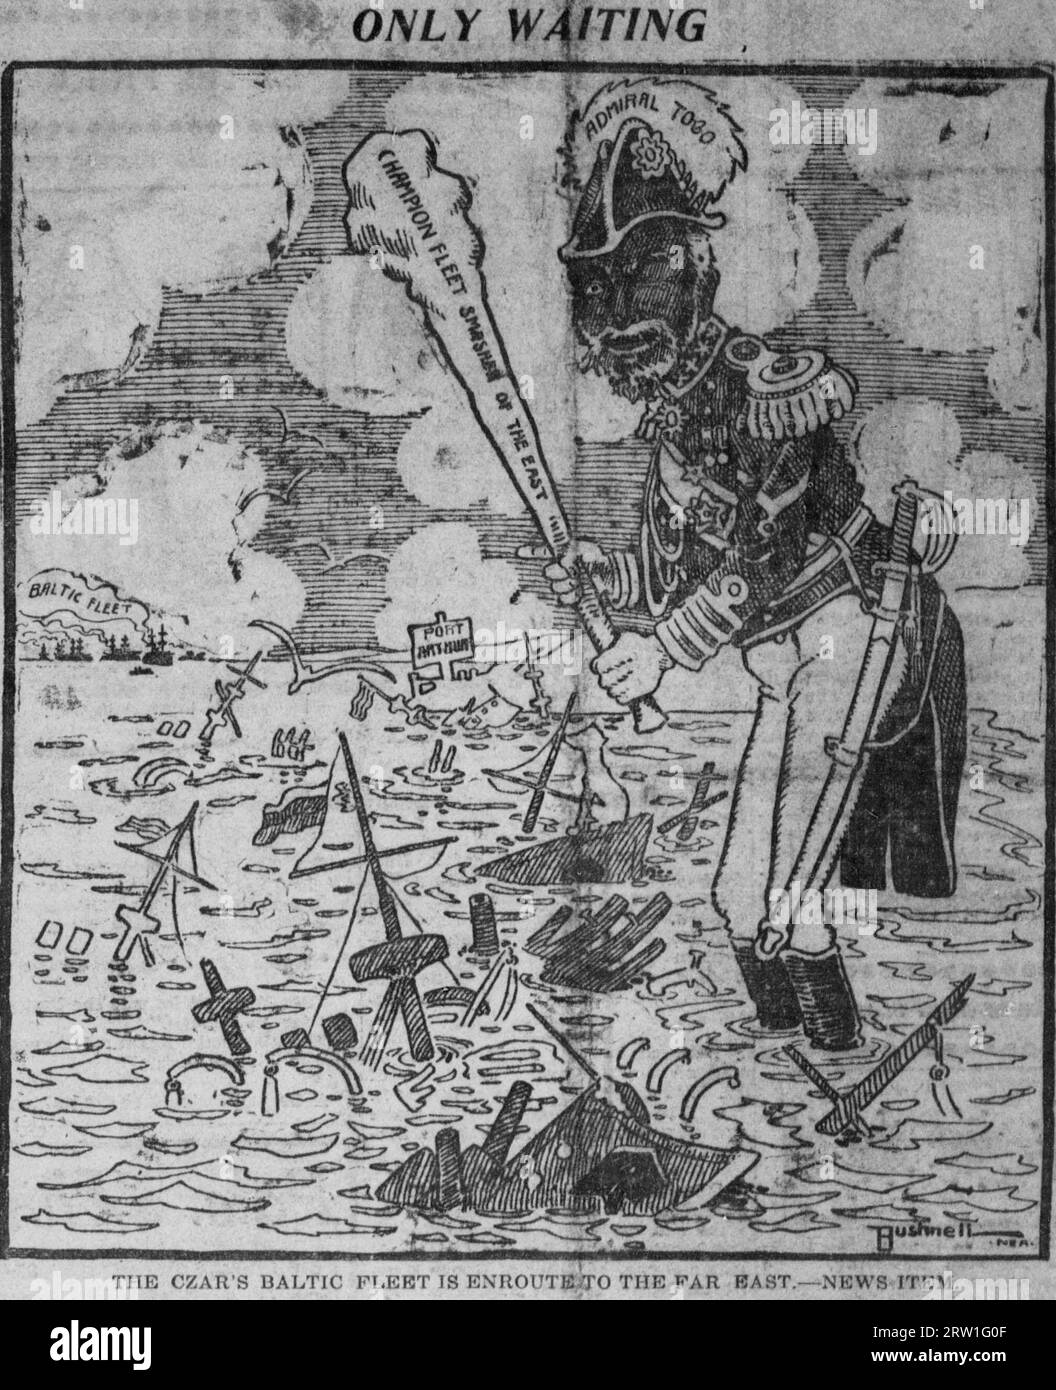 Tōgō Heihachirō (personifying the Imperial Japanese Navy) stands at Port Arthur among the wreckage of the Pacific Fleet, wielding his club; off in the distance, the Baltic Fleet approaches. Stock Photo